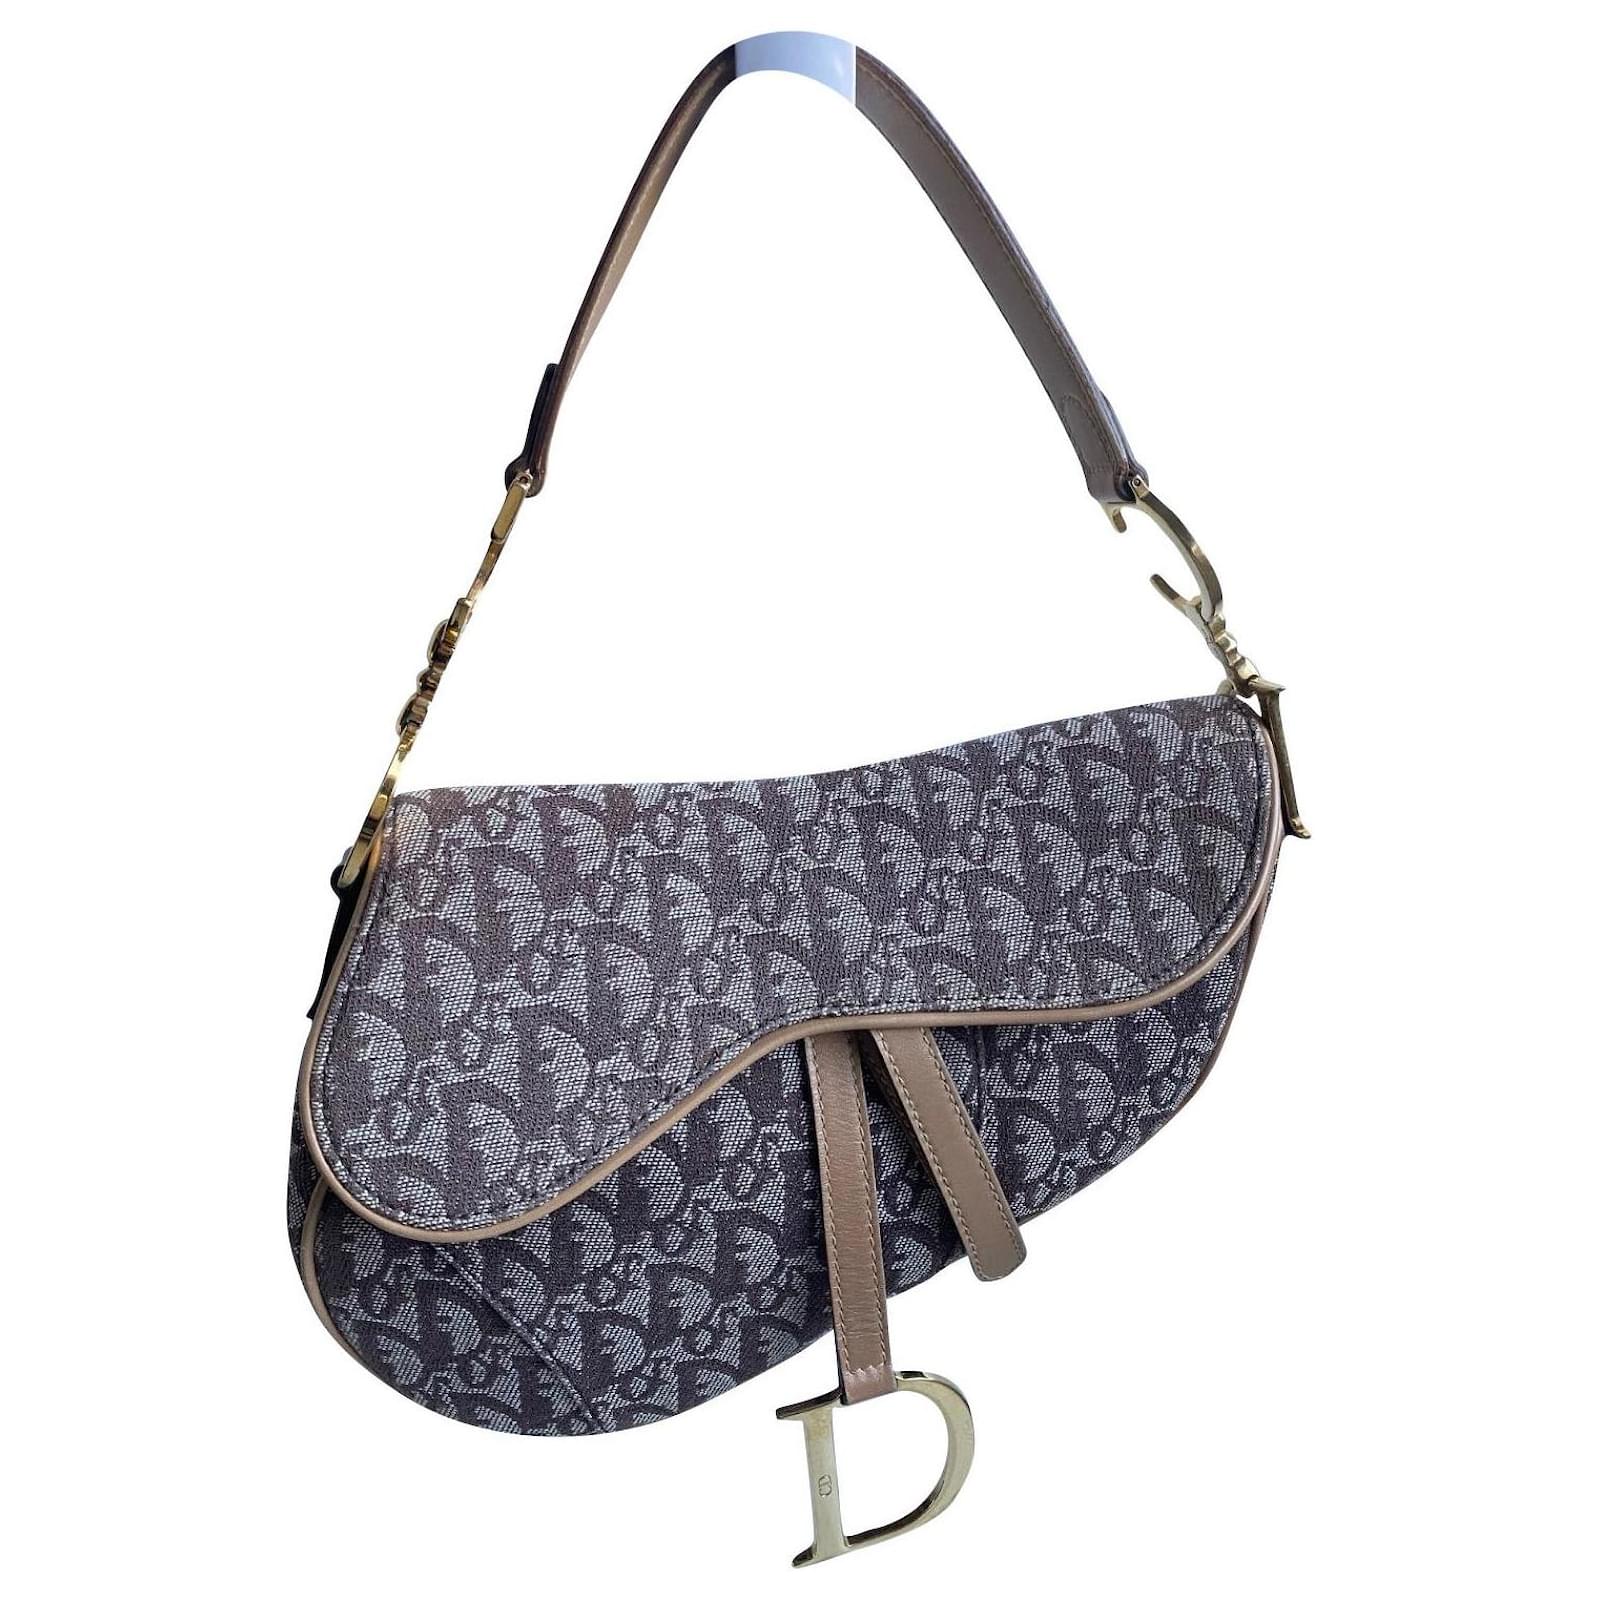 Preowned Christian Dior Double Saddle Bag Brown Diorissimo Canvas Gol   Madison Avenue Couture